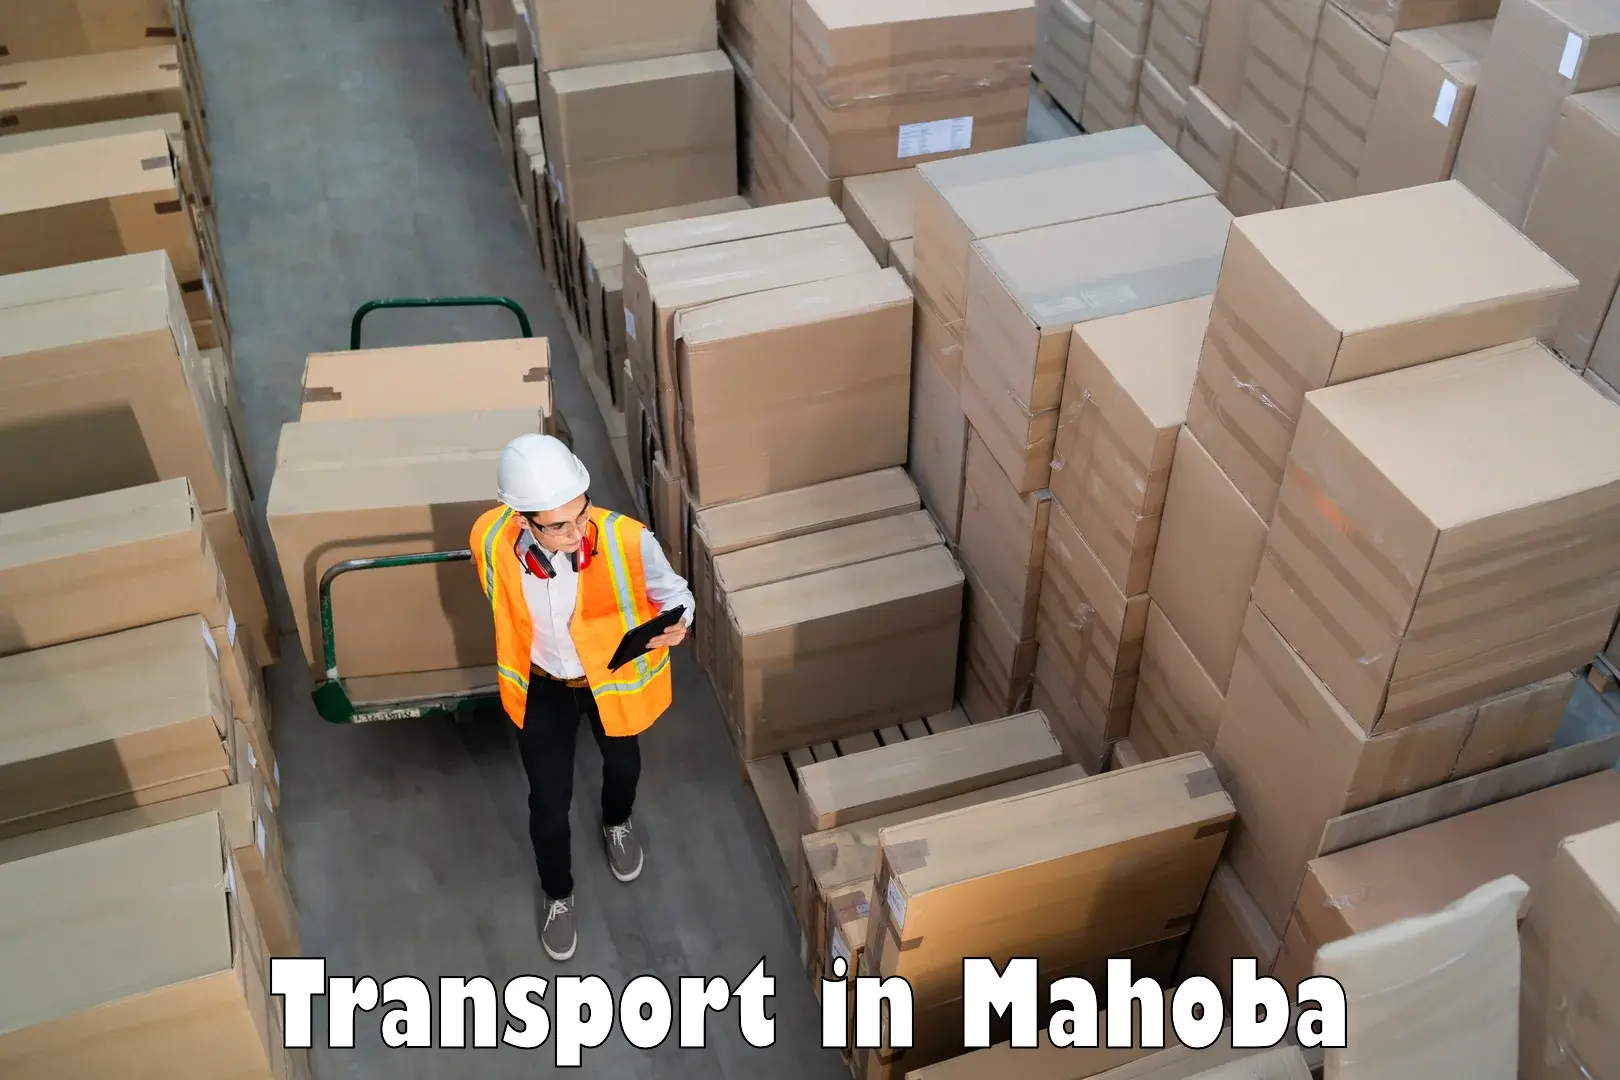 Pick up transport service in Mahoba